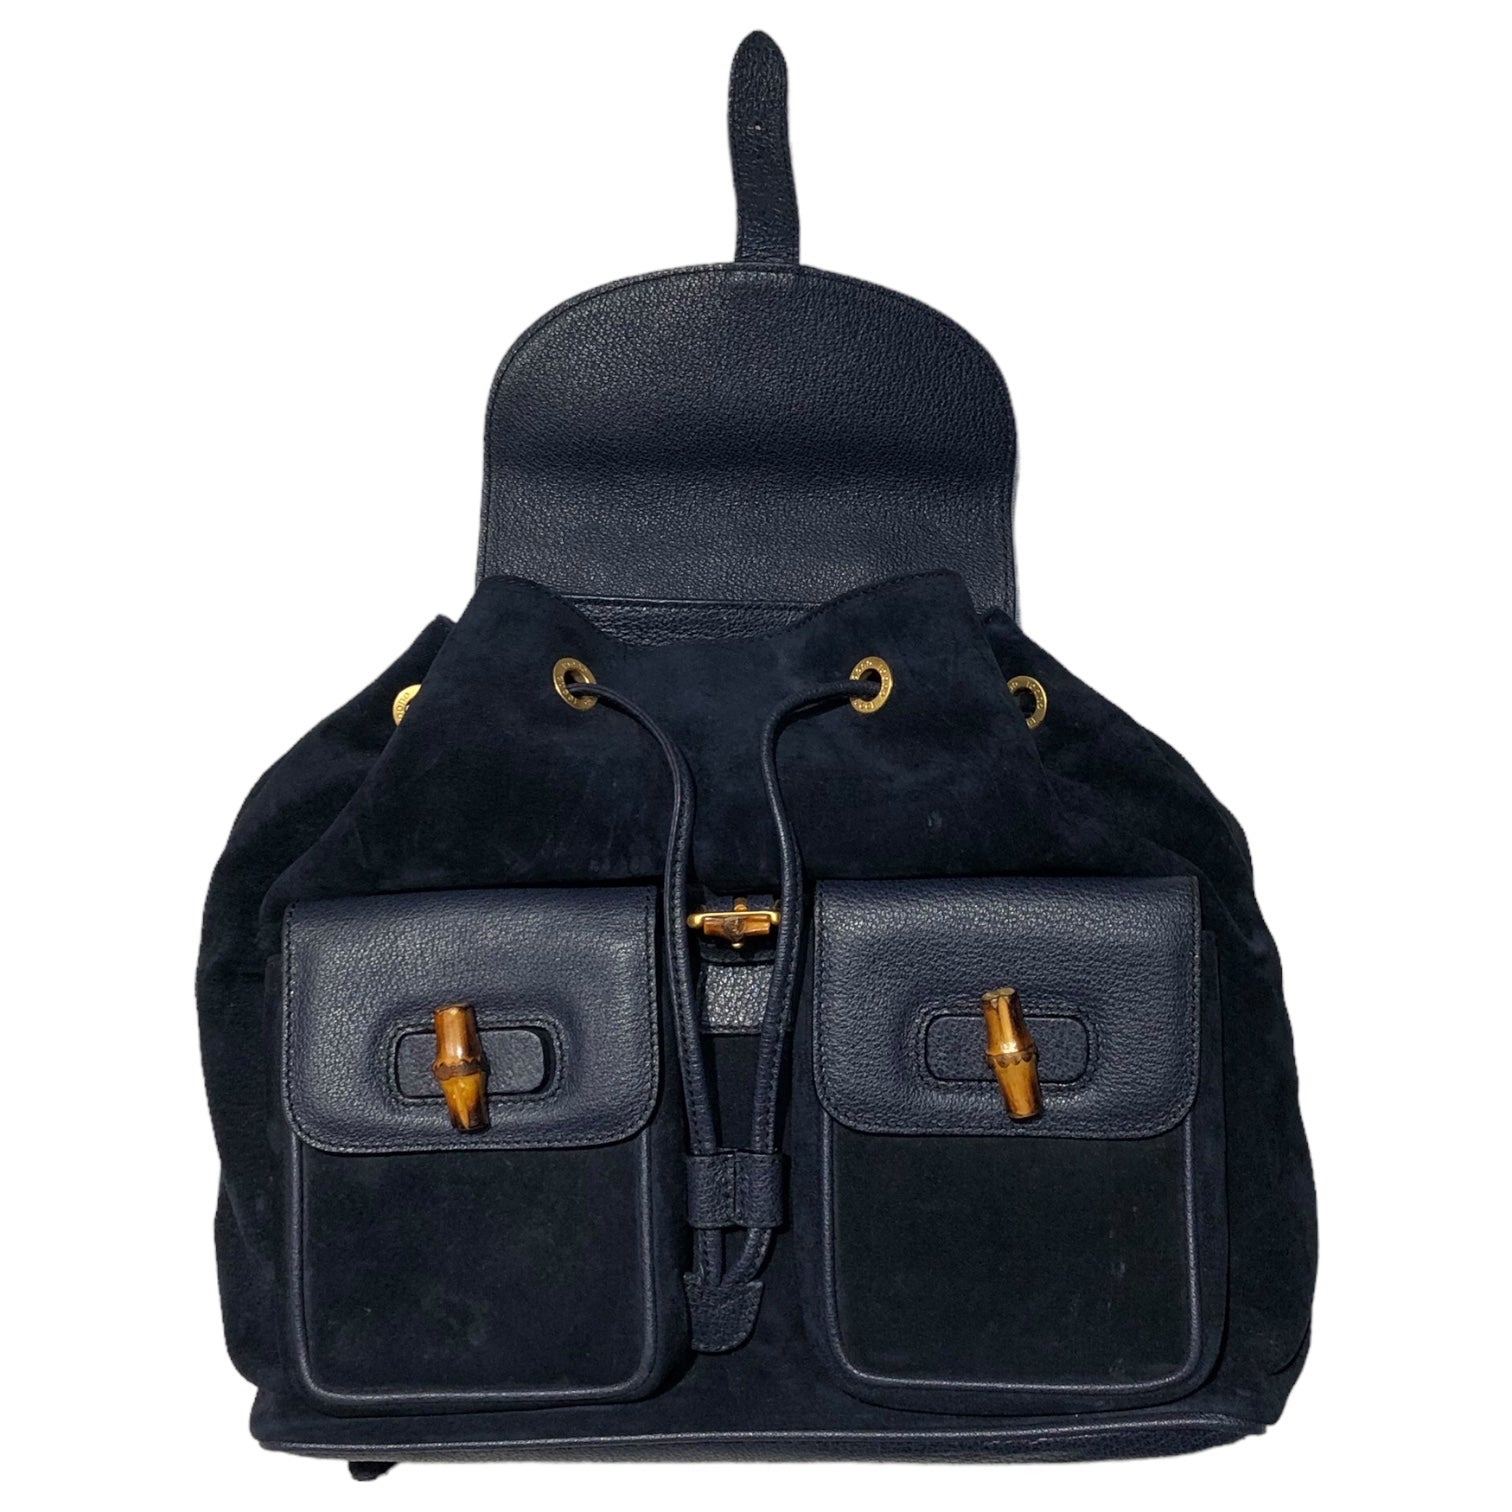 GUCCI(グッチ) vintage suede leather bamboo backpack ヴィンテージ スウェード レザー バンブー リュック 003 1998 0016 ネイビー バックパック 竹 鞄 バッグ